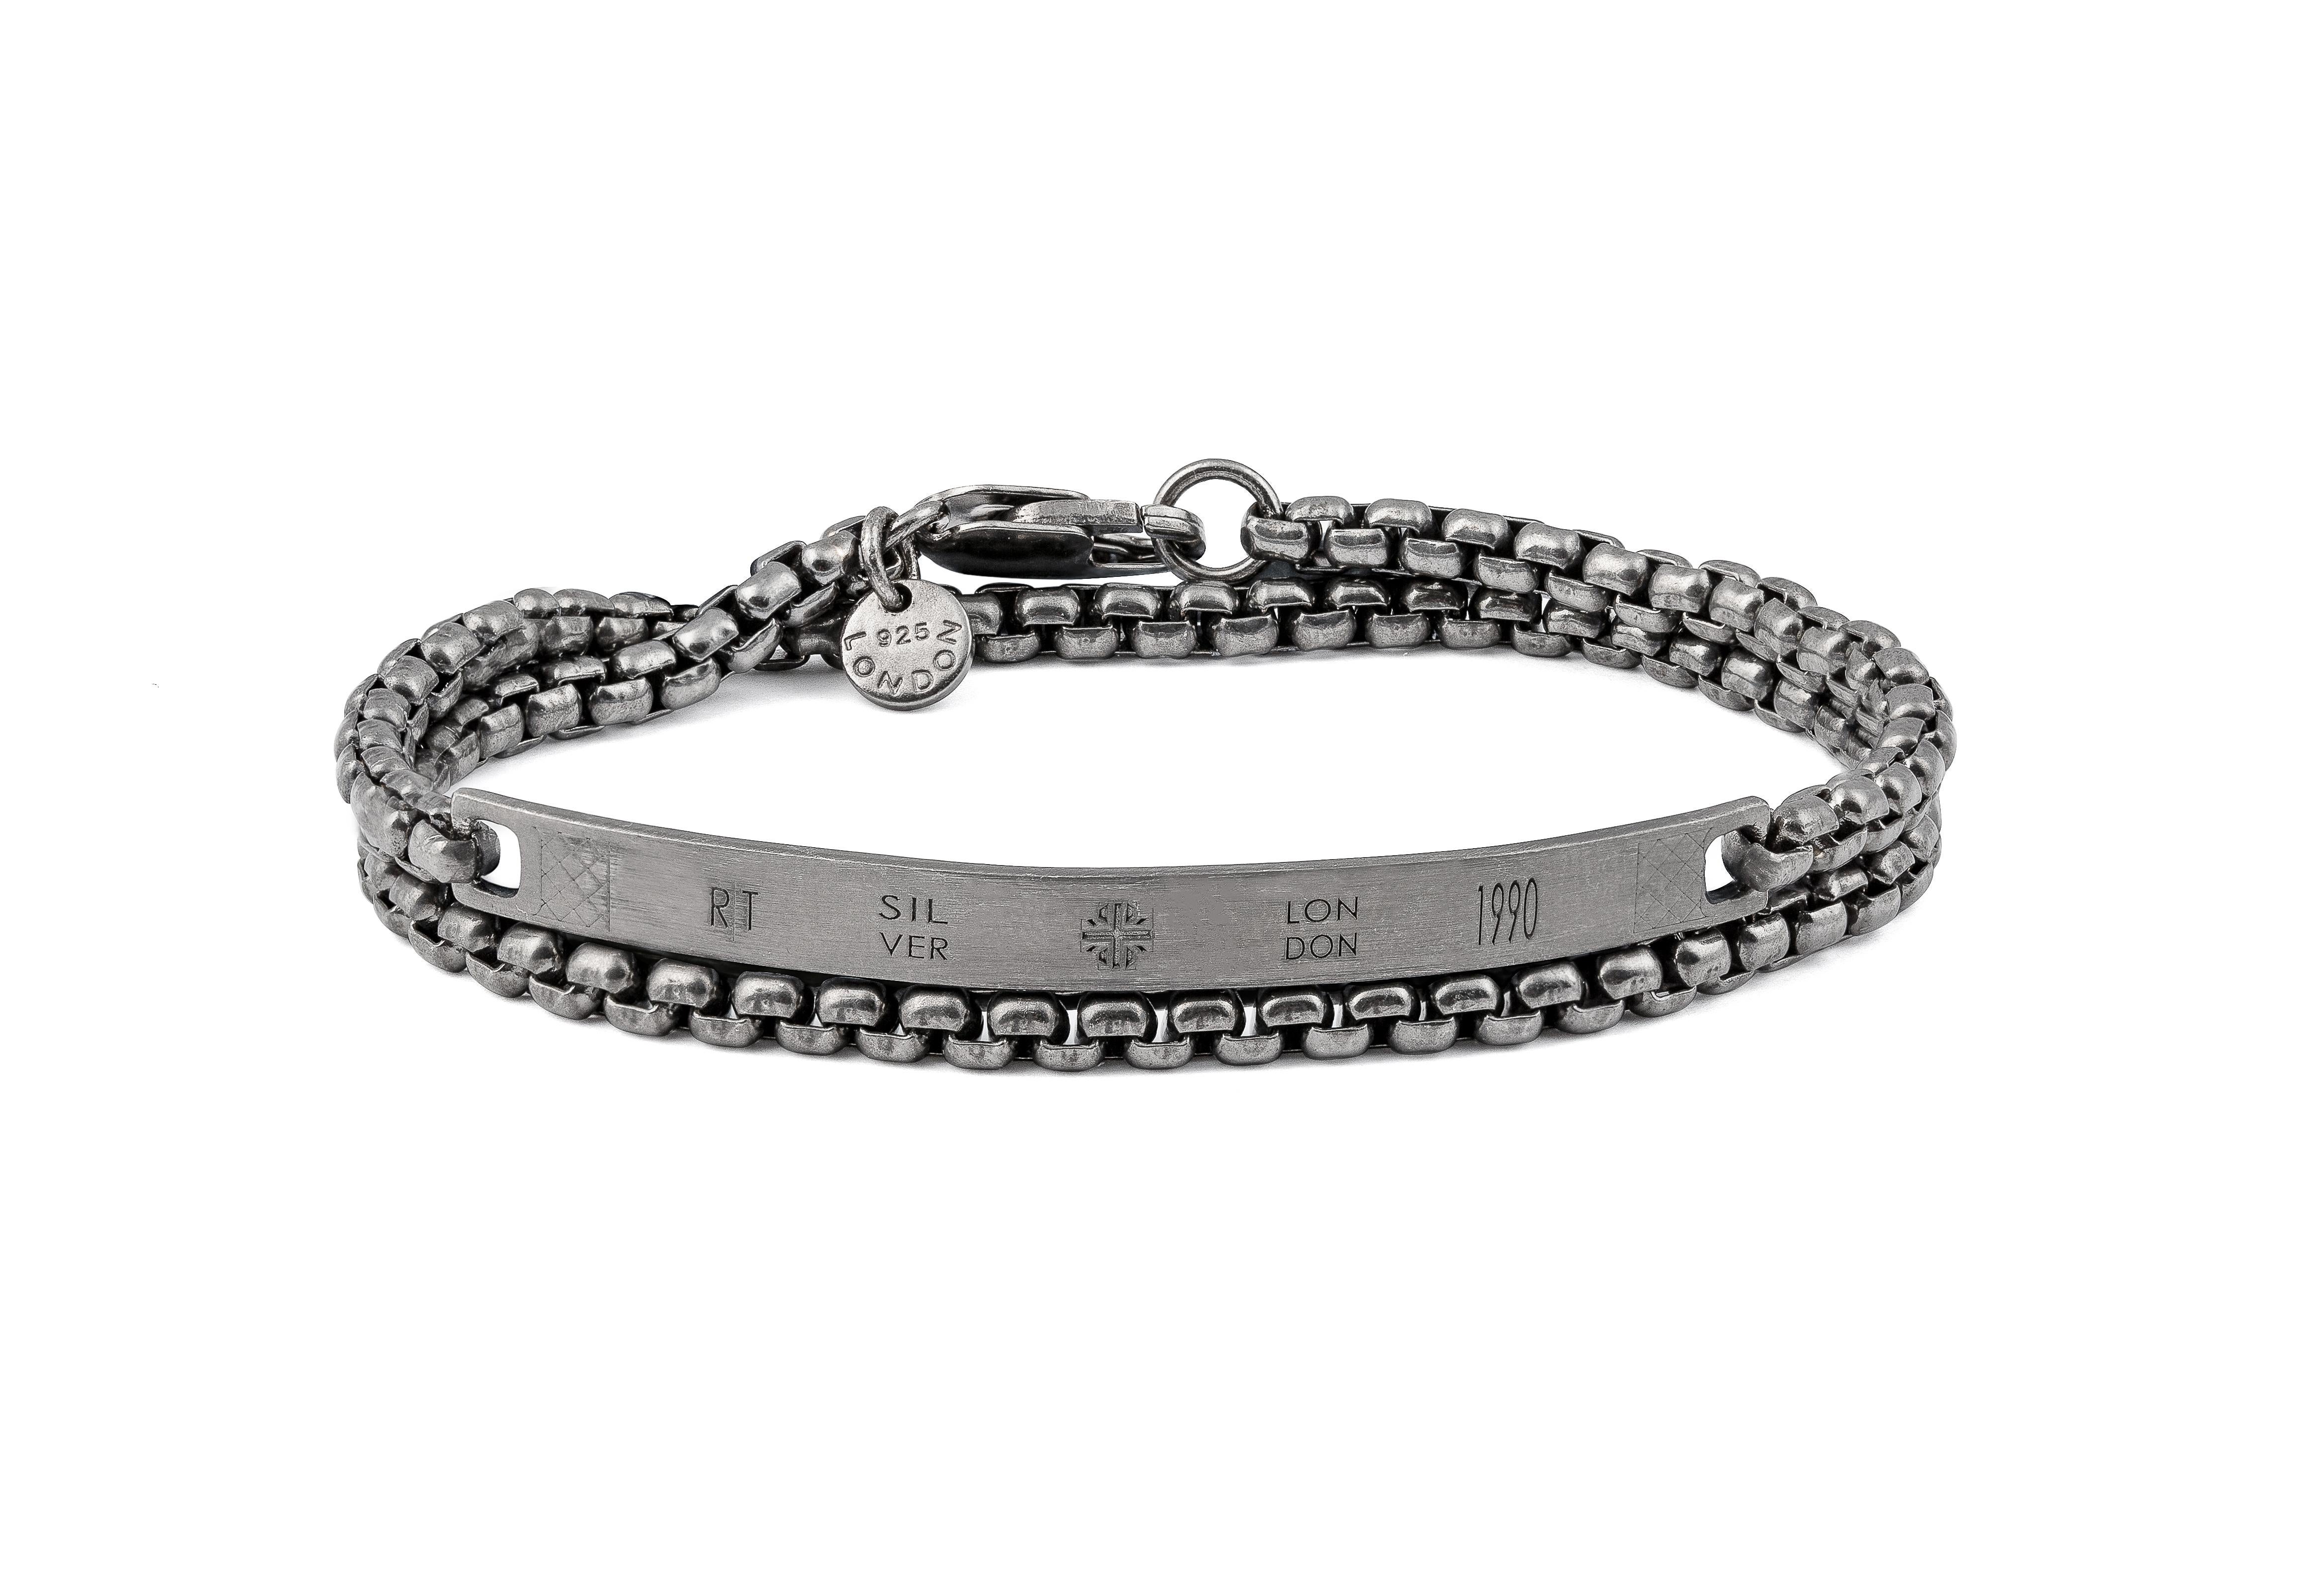 Identity Chain Bracelet In Brushed Black Rhodium Plated Sterling Silver, Size S

Our silver box chain has been extended into a sleek double wrap bracelet, with a smooth, curved bar decorated with our hallmarks. Finished in matte black, rhodium